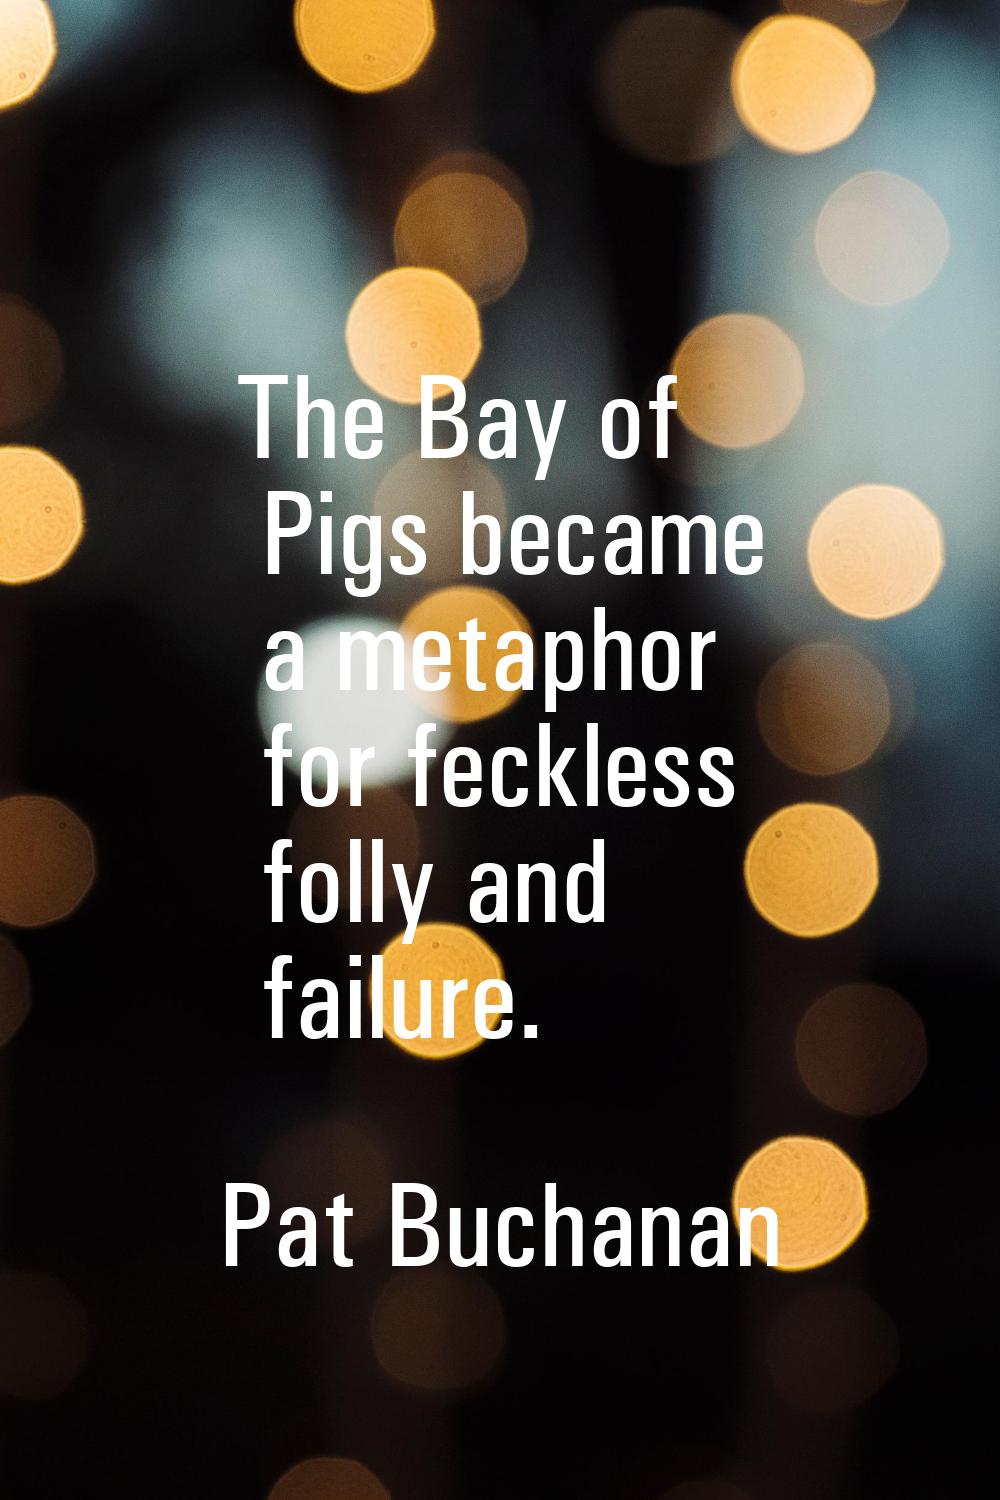 The Bay of Pigs became a metaphor for feckless folly and failure.